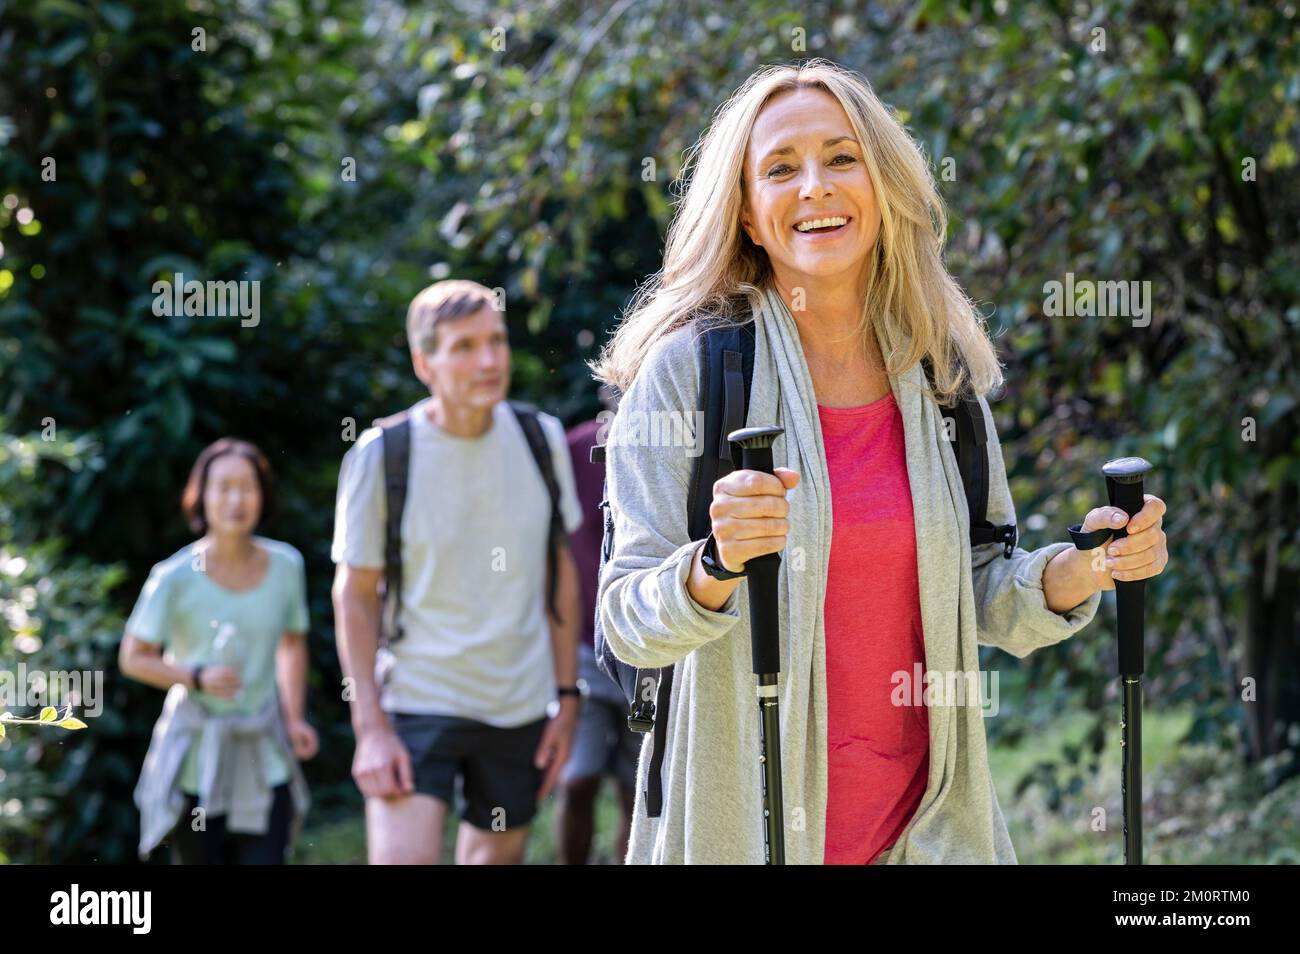 Blonde middle aged lady carrying backback and hiking poles hiking in the woods with group of friends Stock Photo